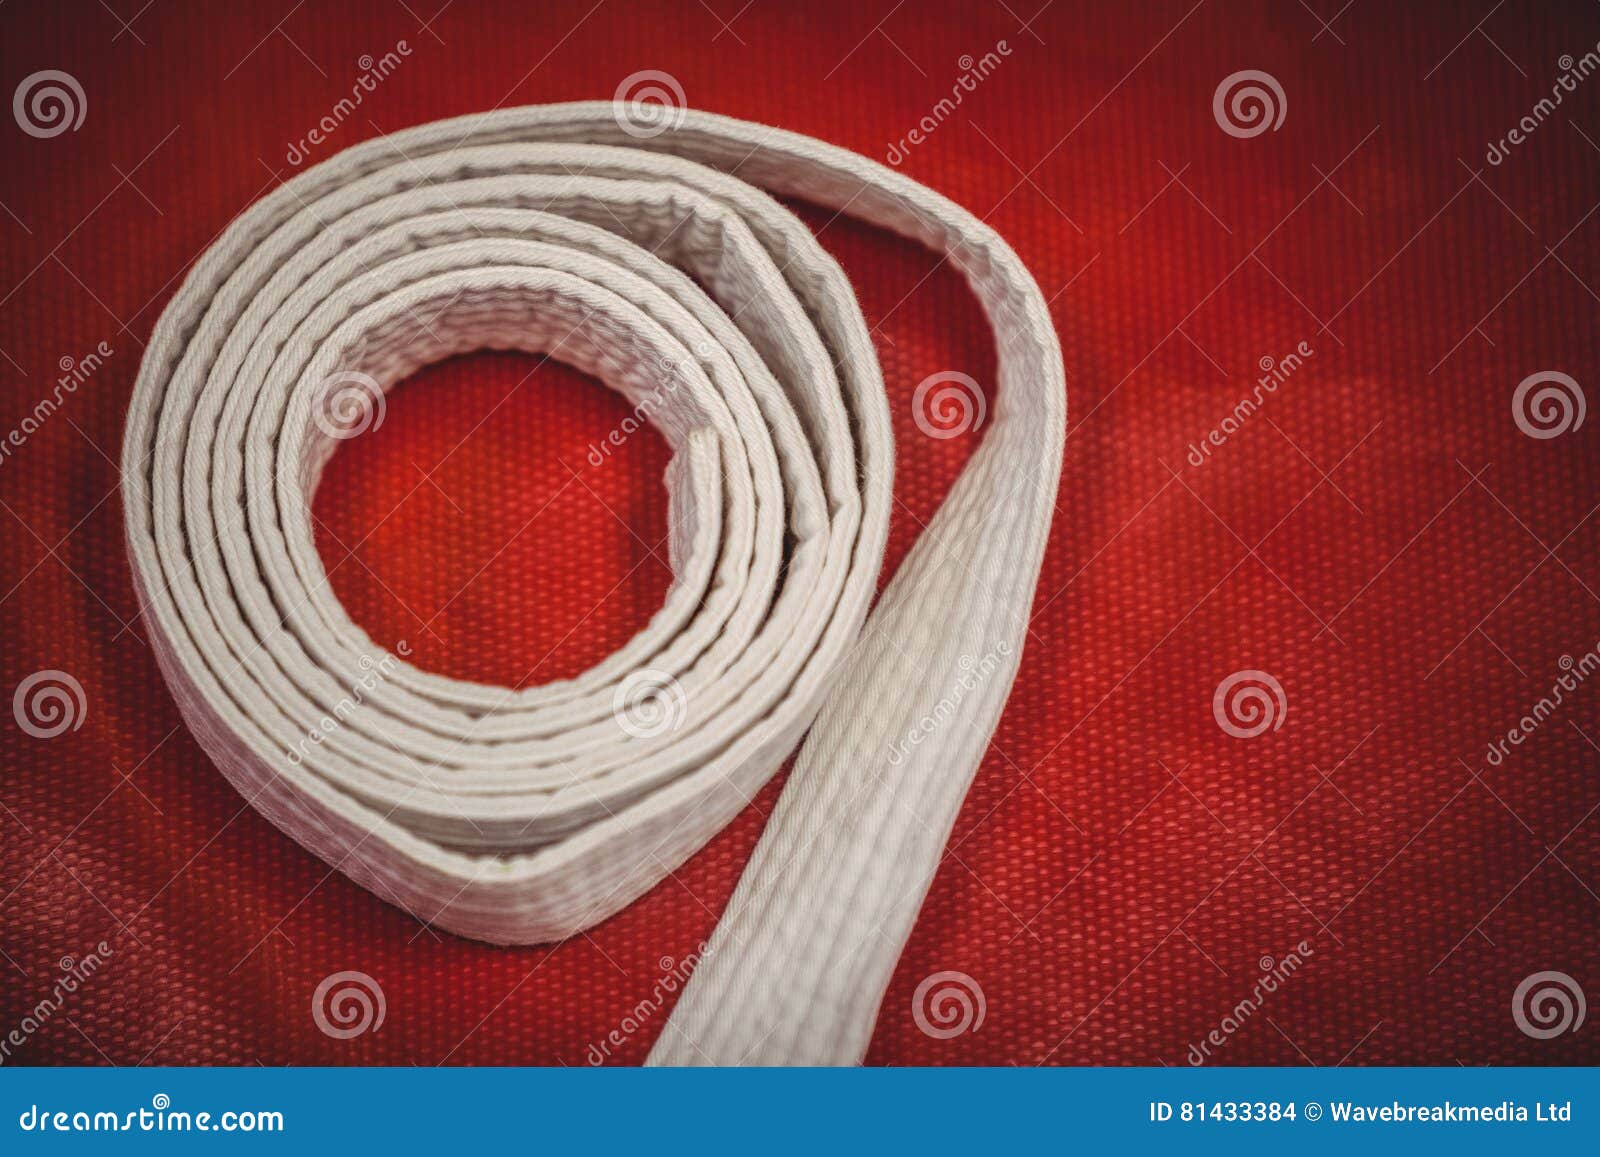 Karate White Belt on Red Background Stock Photo - Image of drip